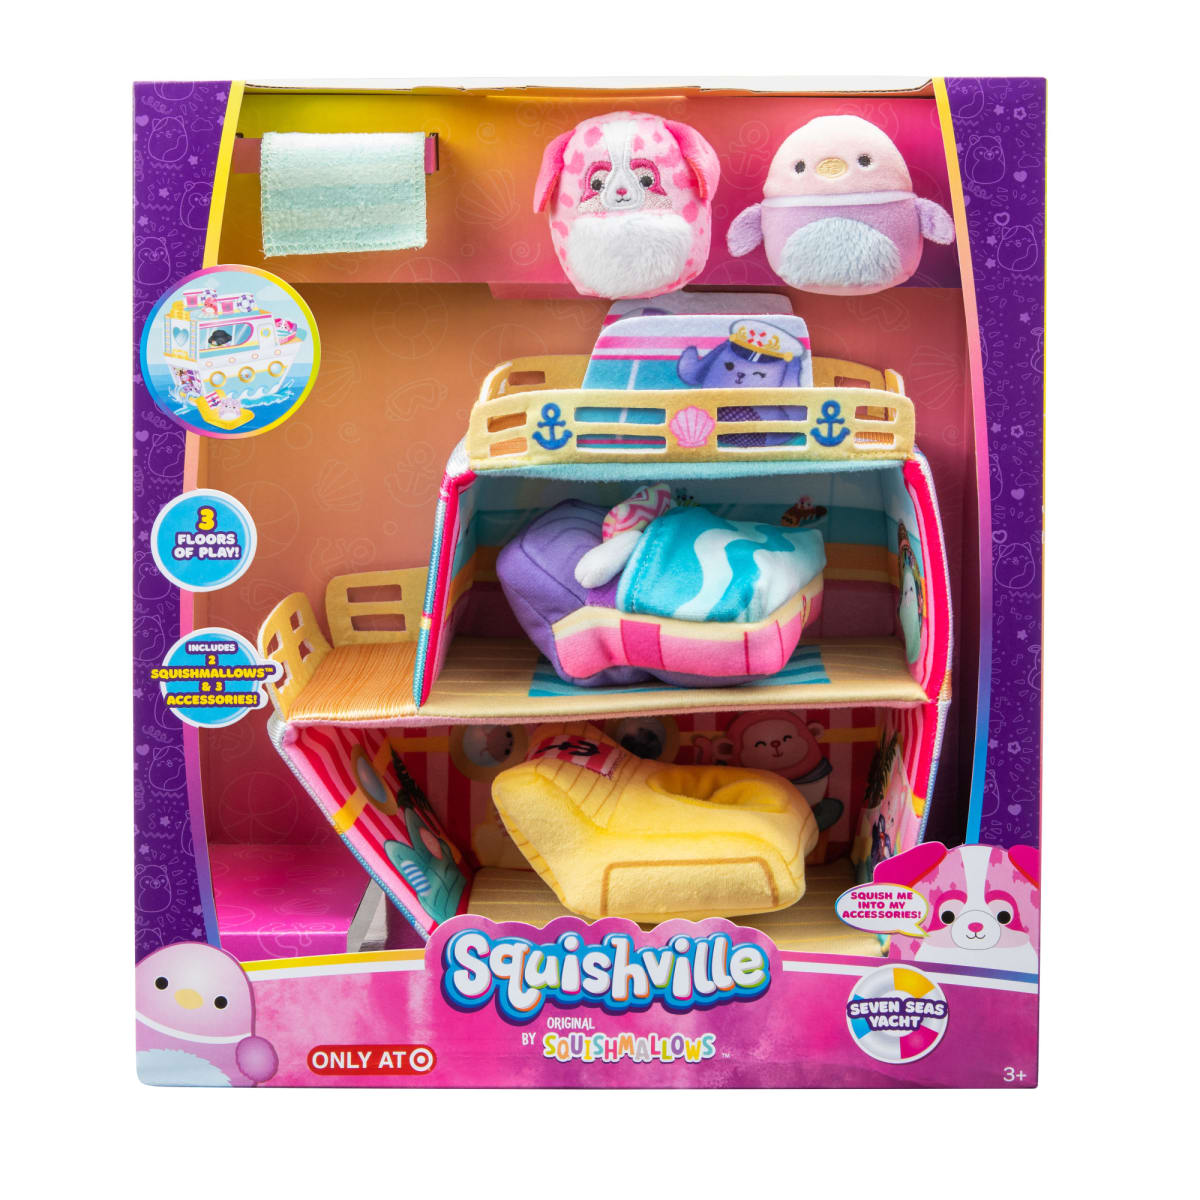 Squishville by Squishmallow Seven Seas Yacht Deluxe Plush Toy Playset 